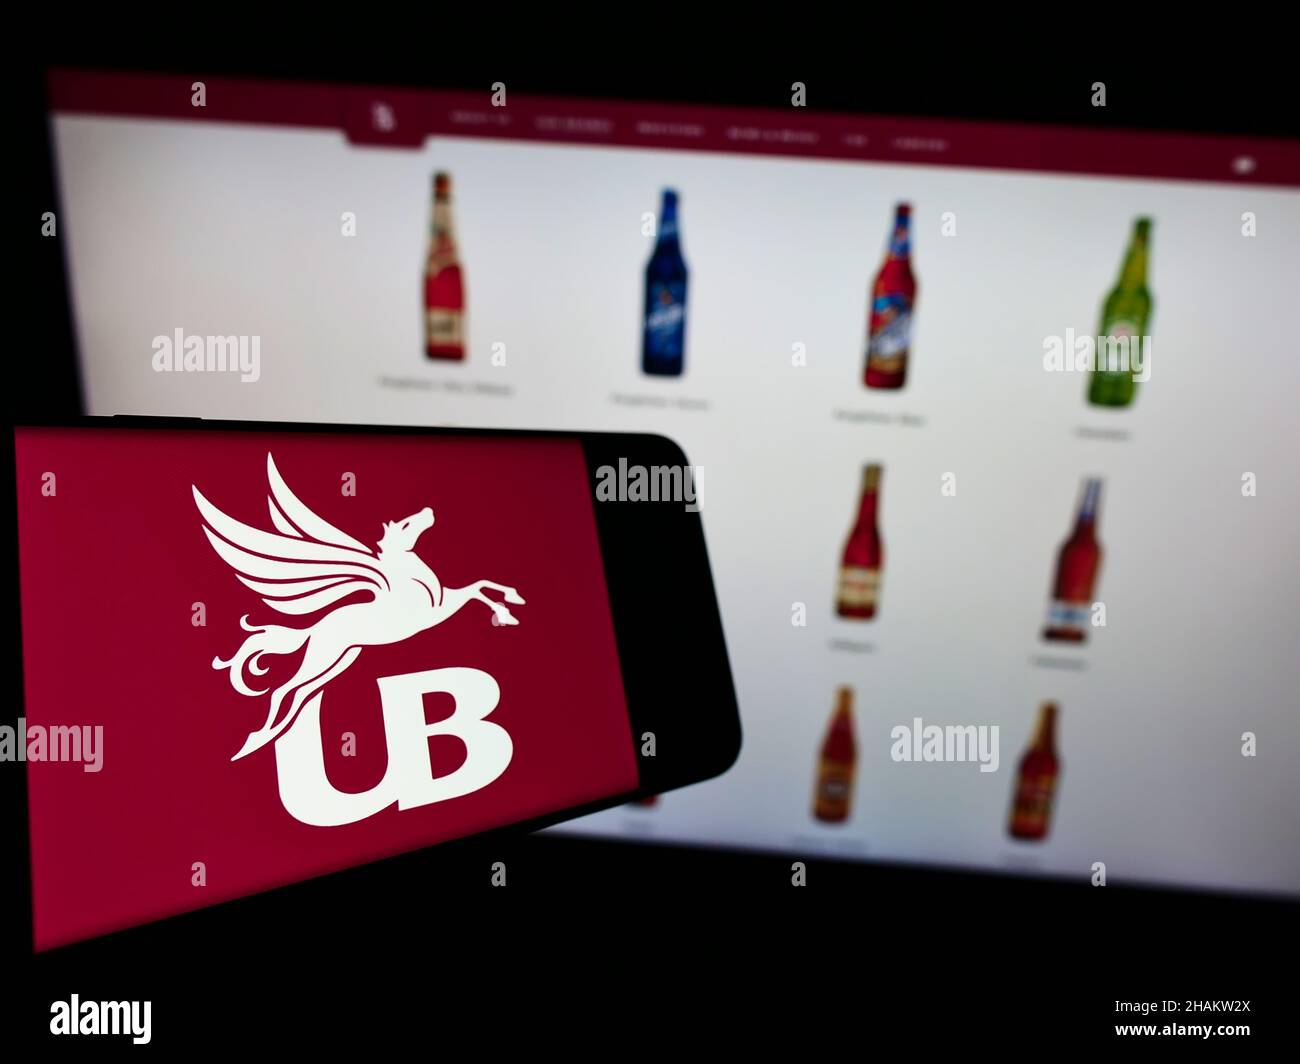 Cellphone with logo of company United Breweries Holdings Limited (UBHL) on screen in front of website. Focus on center-left of phone display. Stock Photo